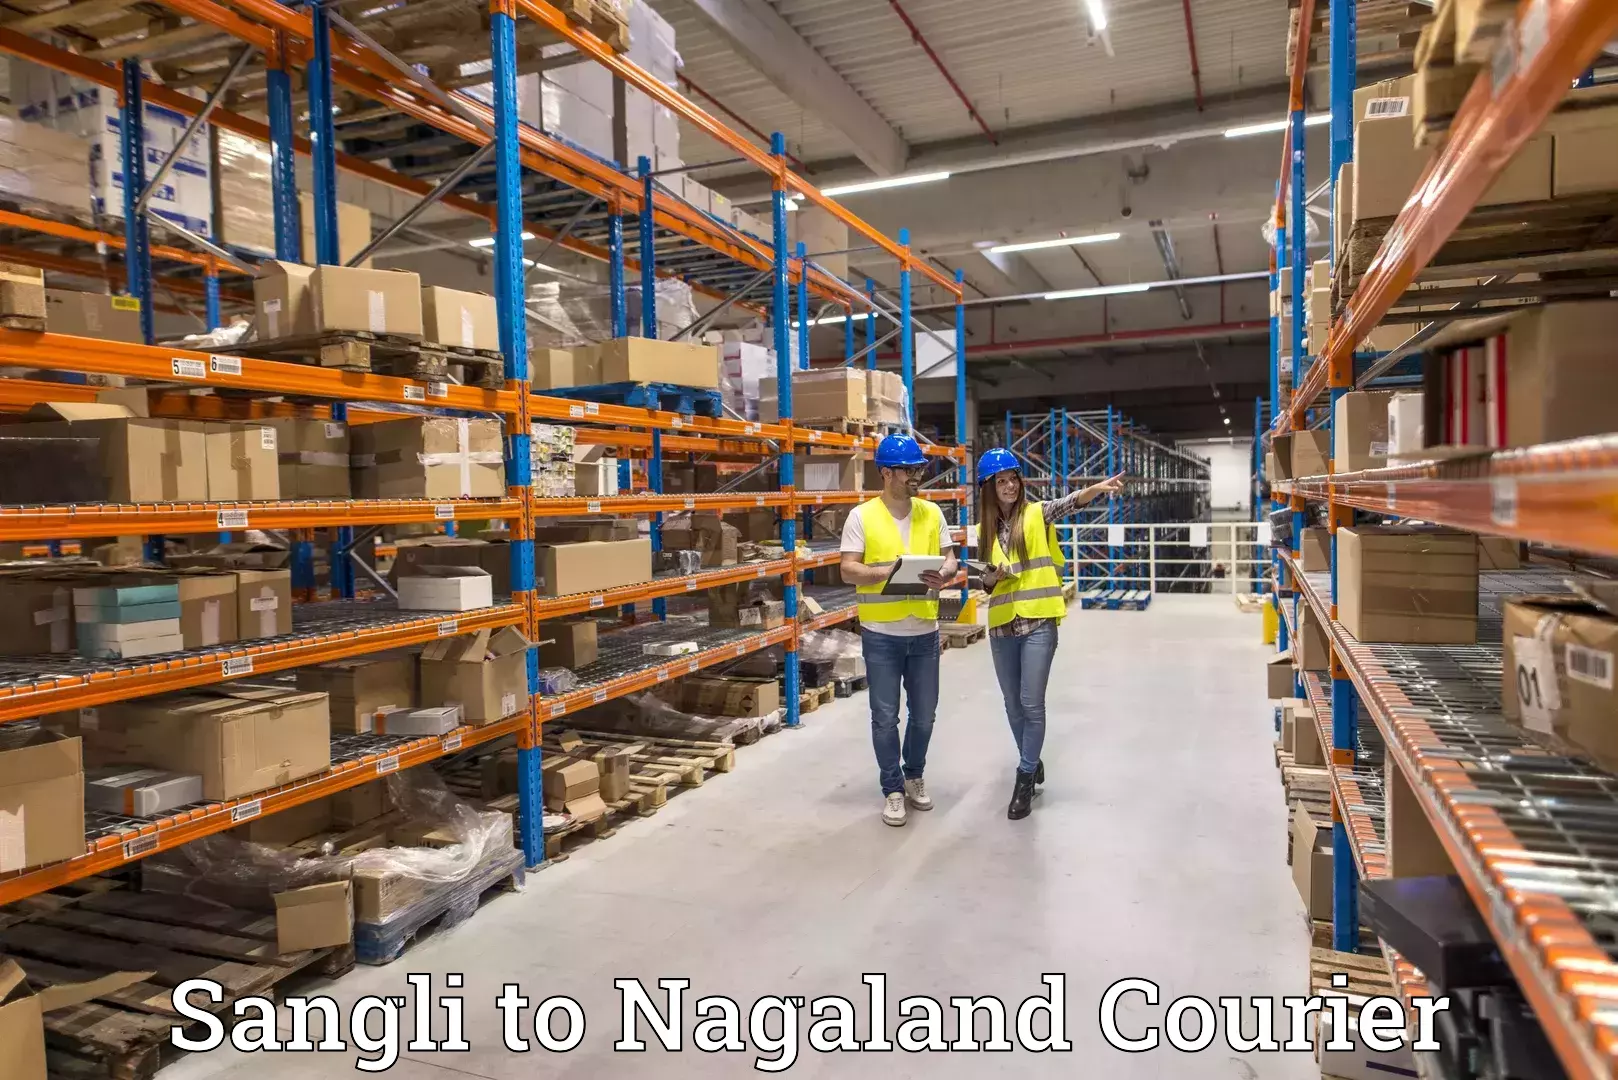 High-priority parcel service Sangli to Nagaland